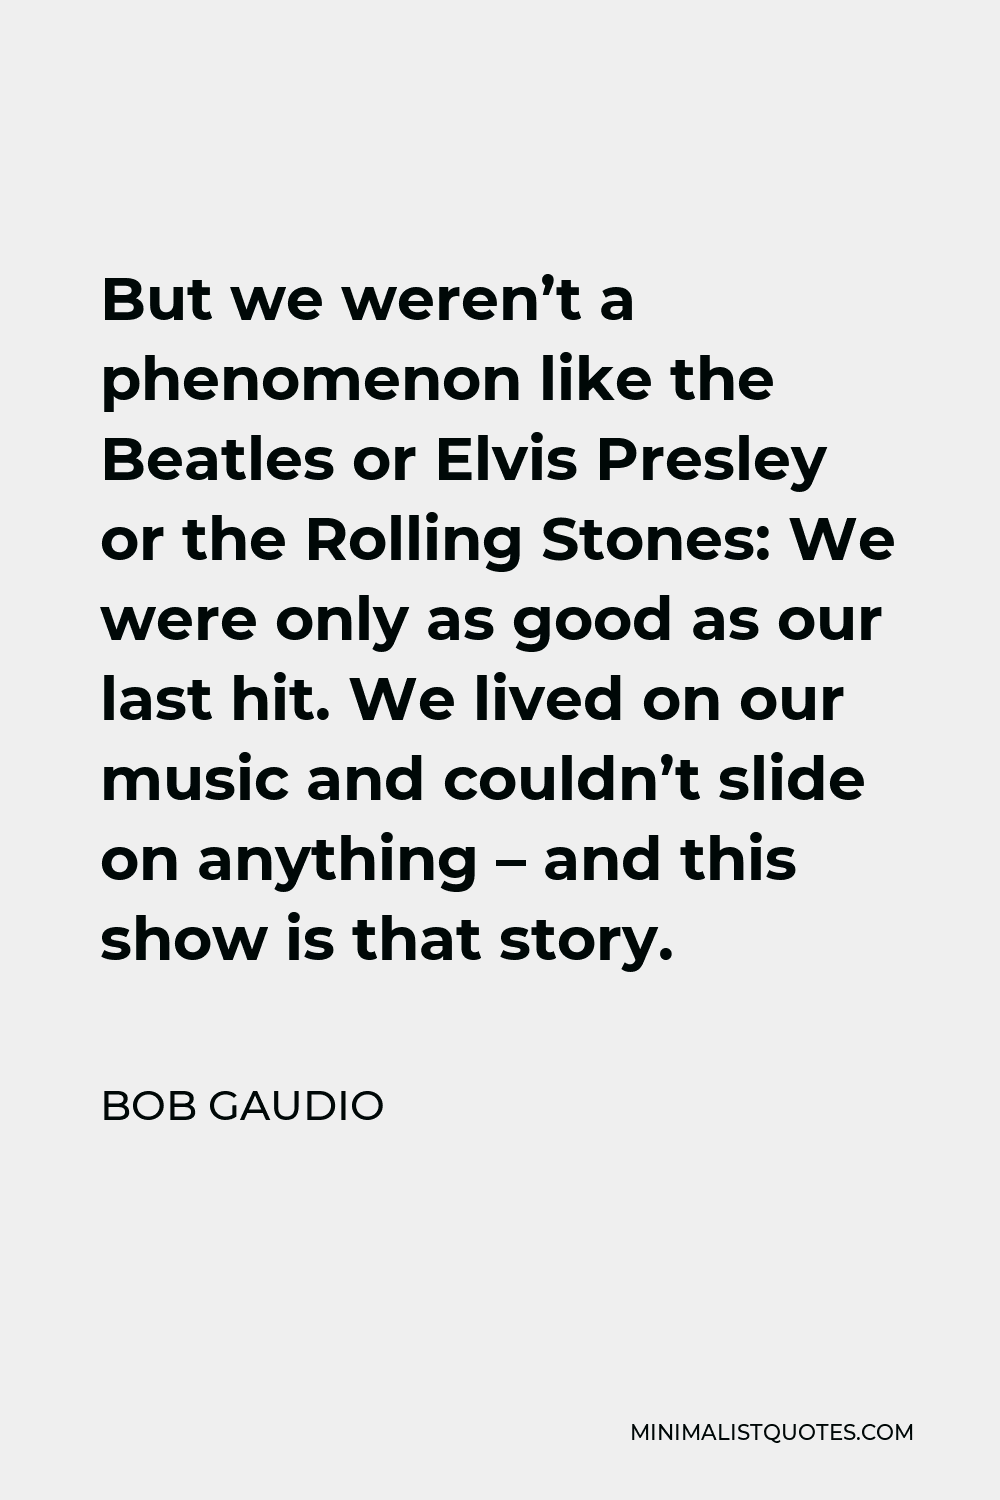 Bob Gaudio Quote - But we weren’t a phenomenon like the Beatles or Elvis Presley or the Rolling Stones: We were only as good as our last hit. We lived on our music and couldn’t slide on anything – and this show is that story.